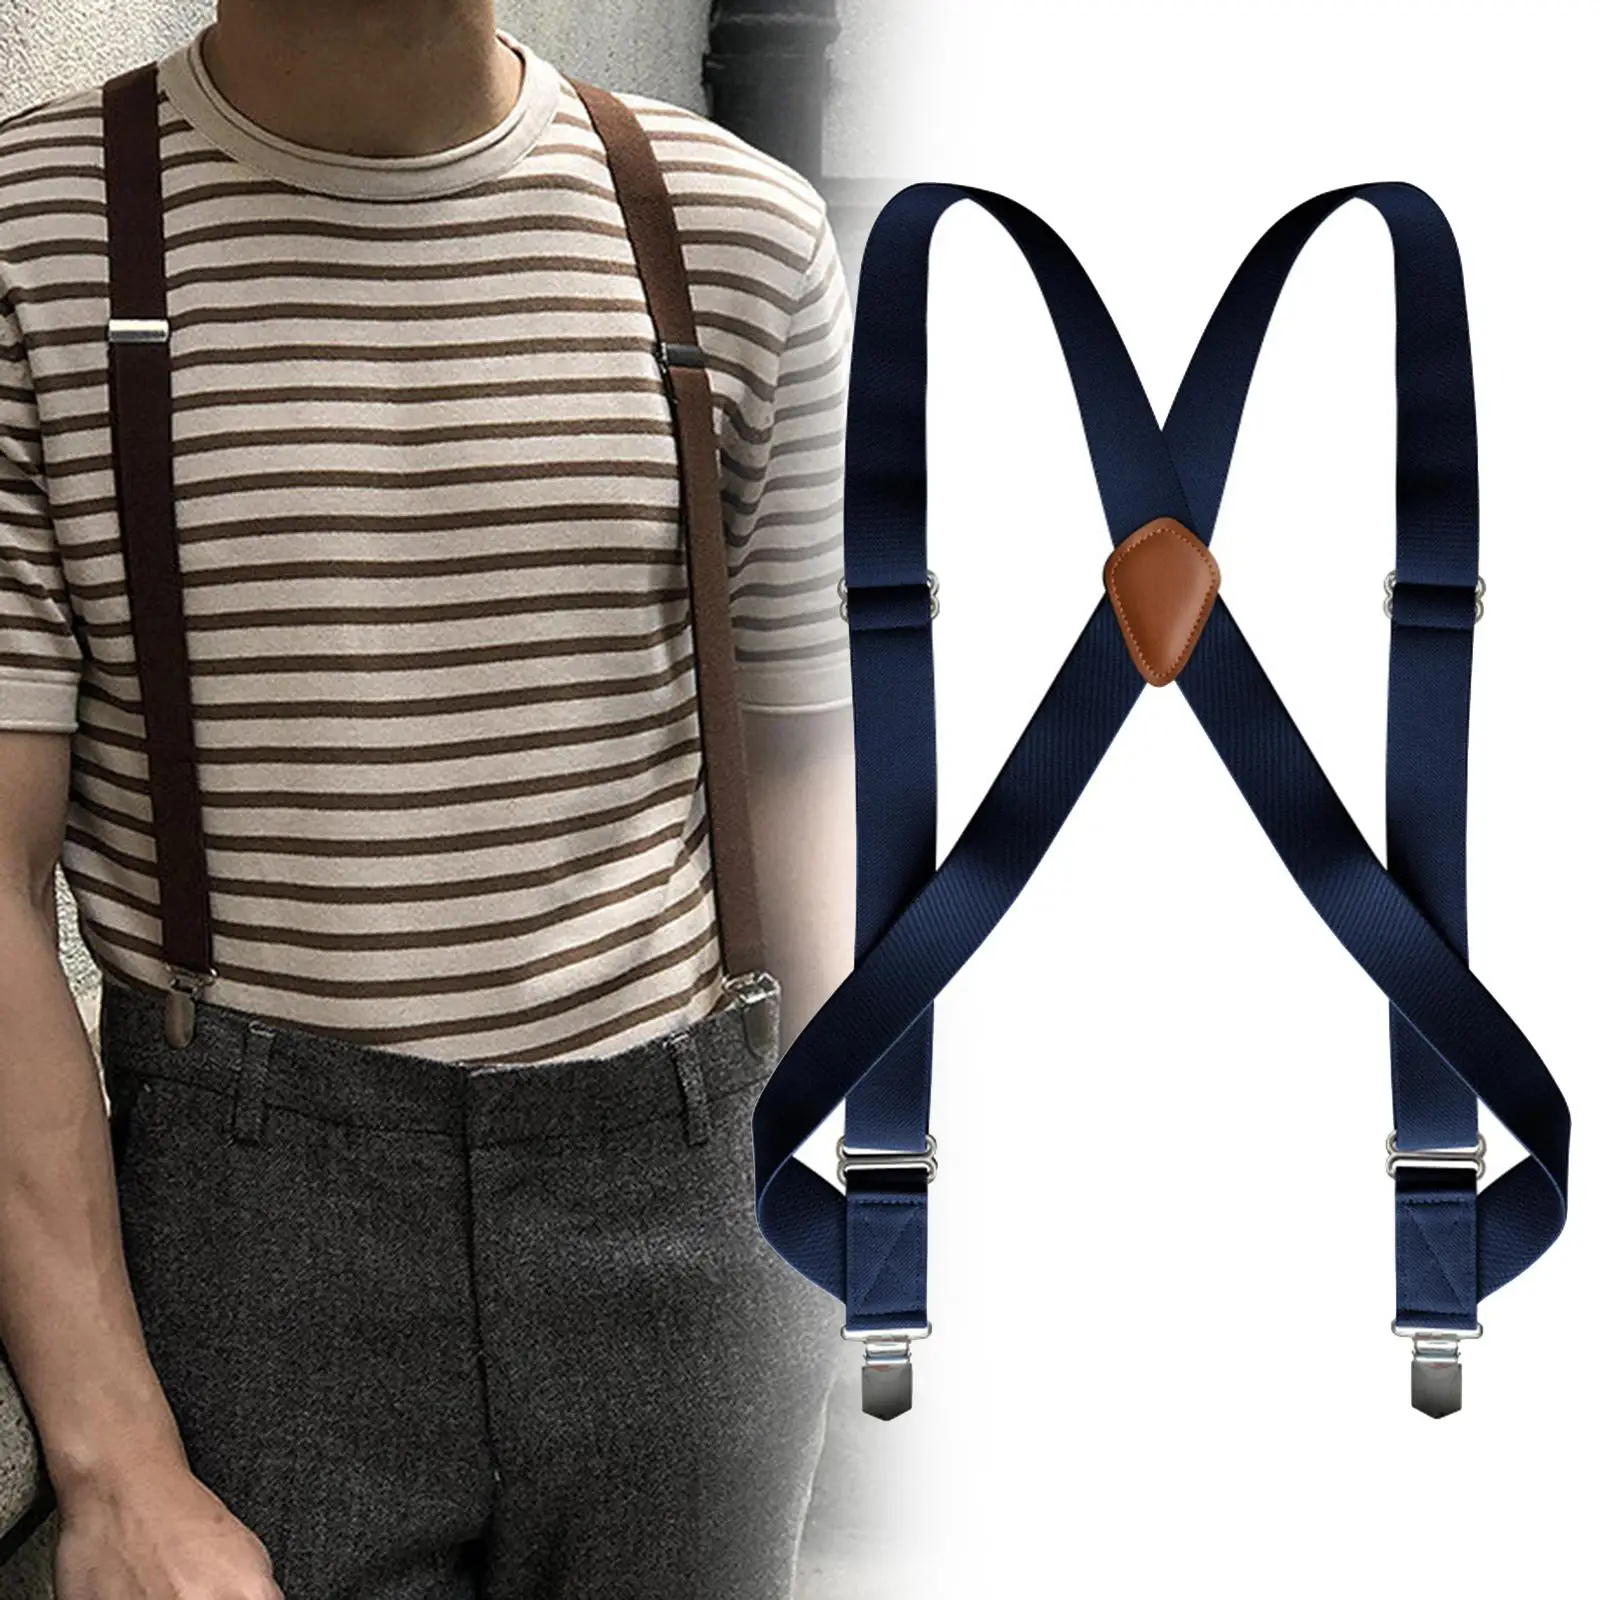 Mens Suspender with Clips Pants Holder Men Gifts Washable Reusable Adjustable Suspenders for Shorts Friends Orchestra Band Prom